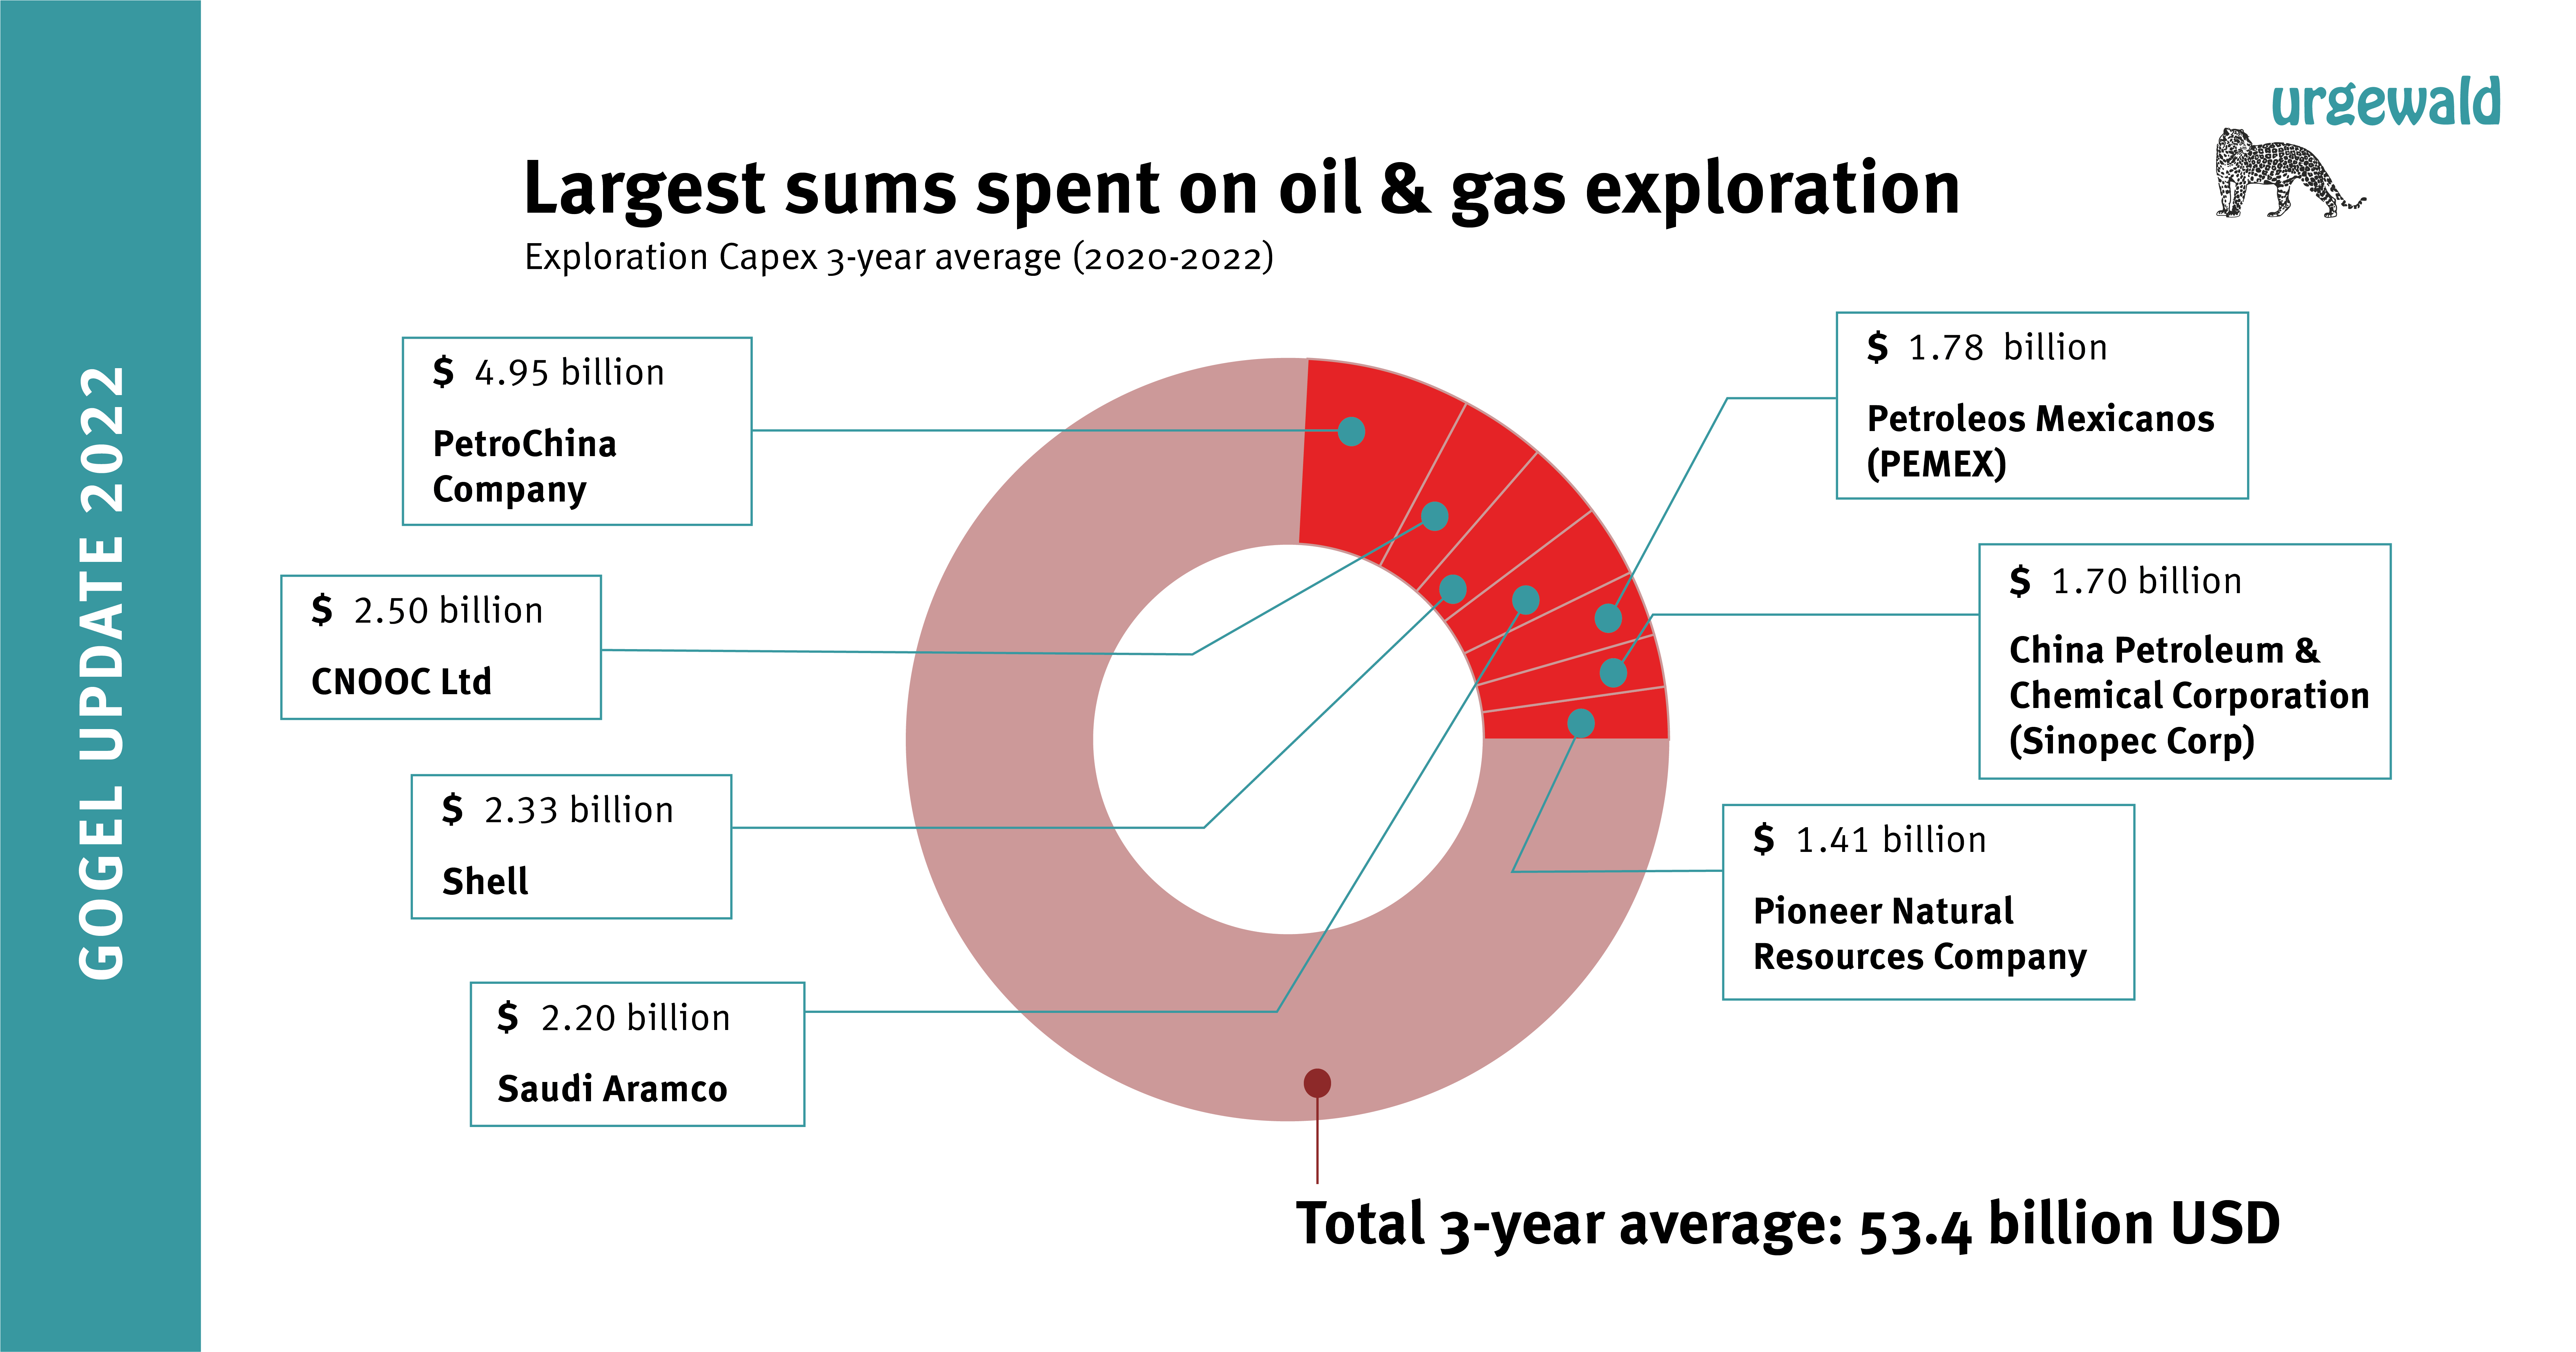 Companies with highest exploration capital expenditures